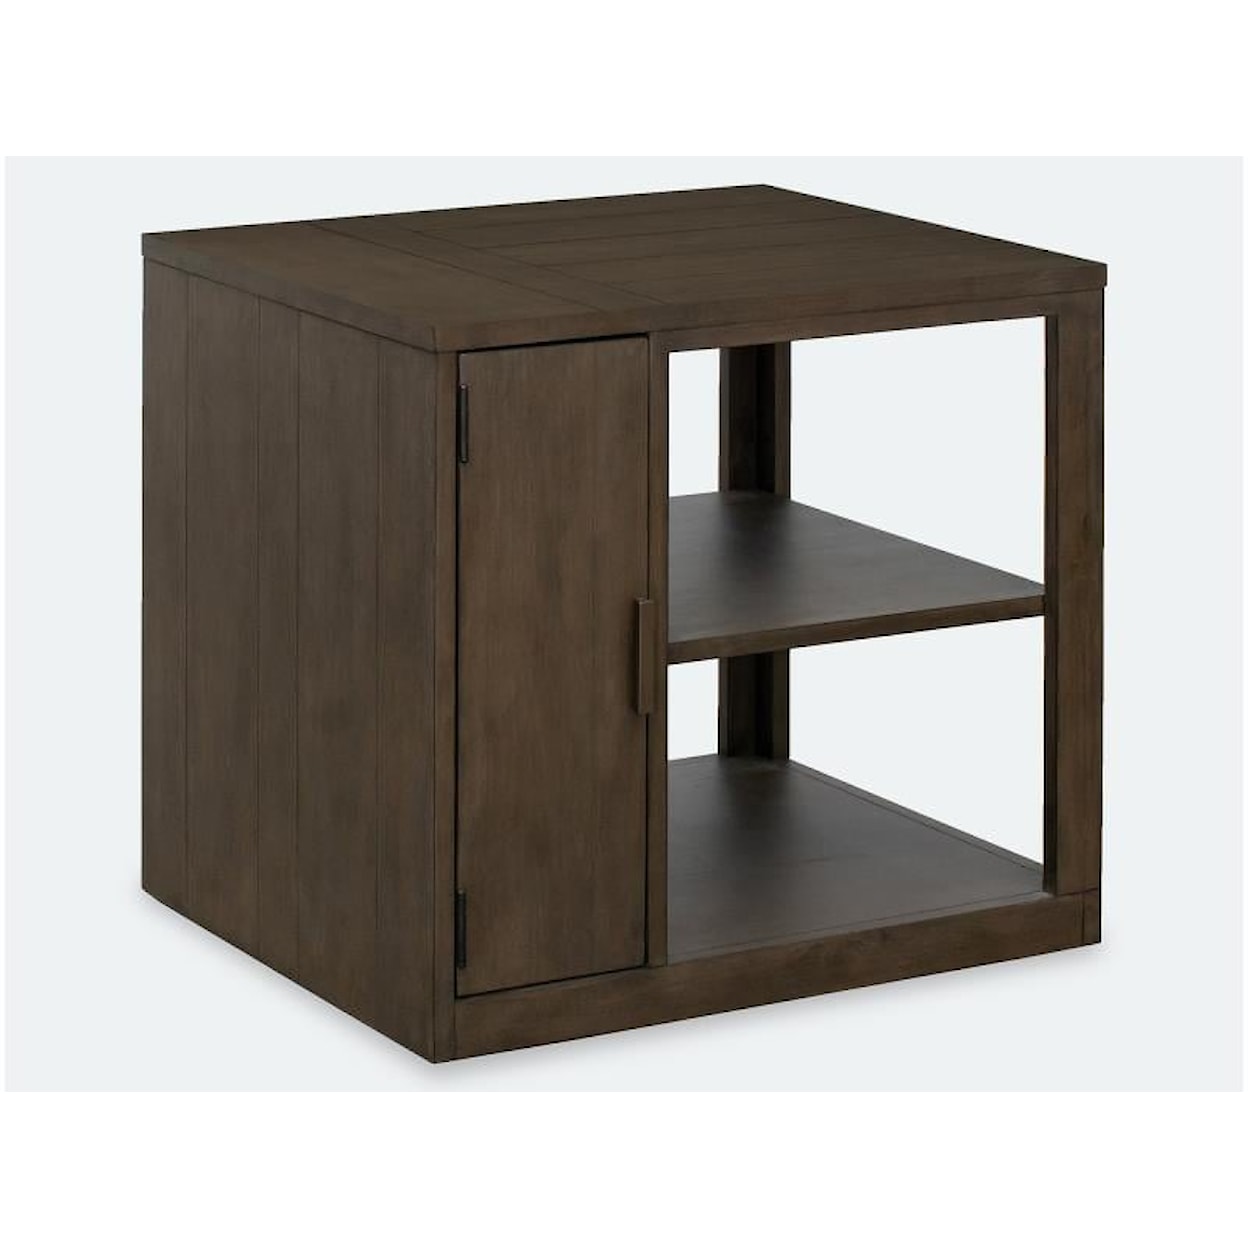 Magnussen Home McGrath Occasional Tables 2-Door Chairside End Table